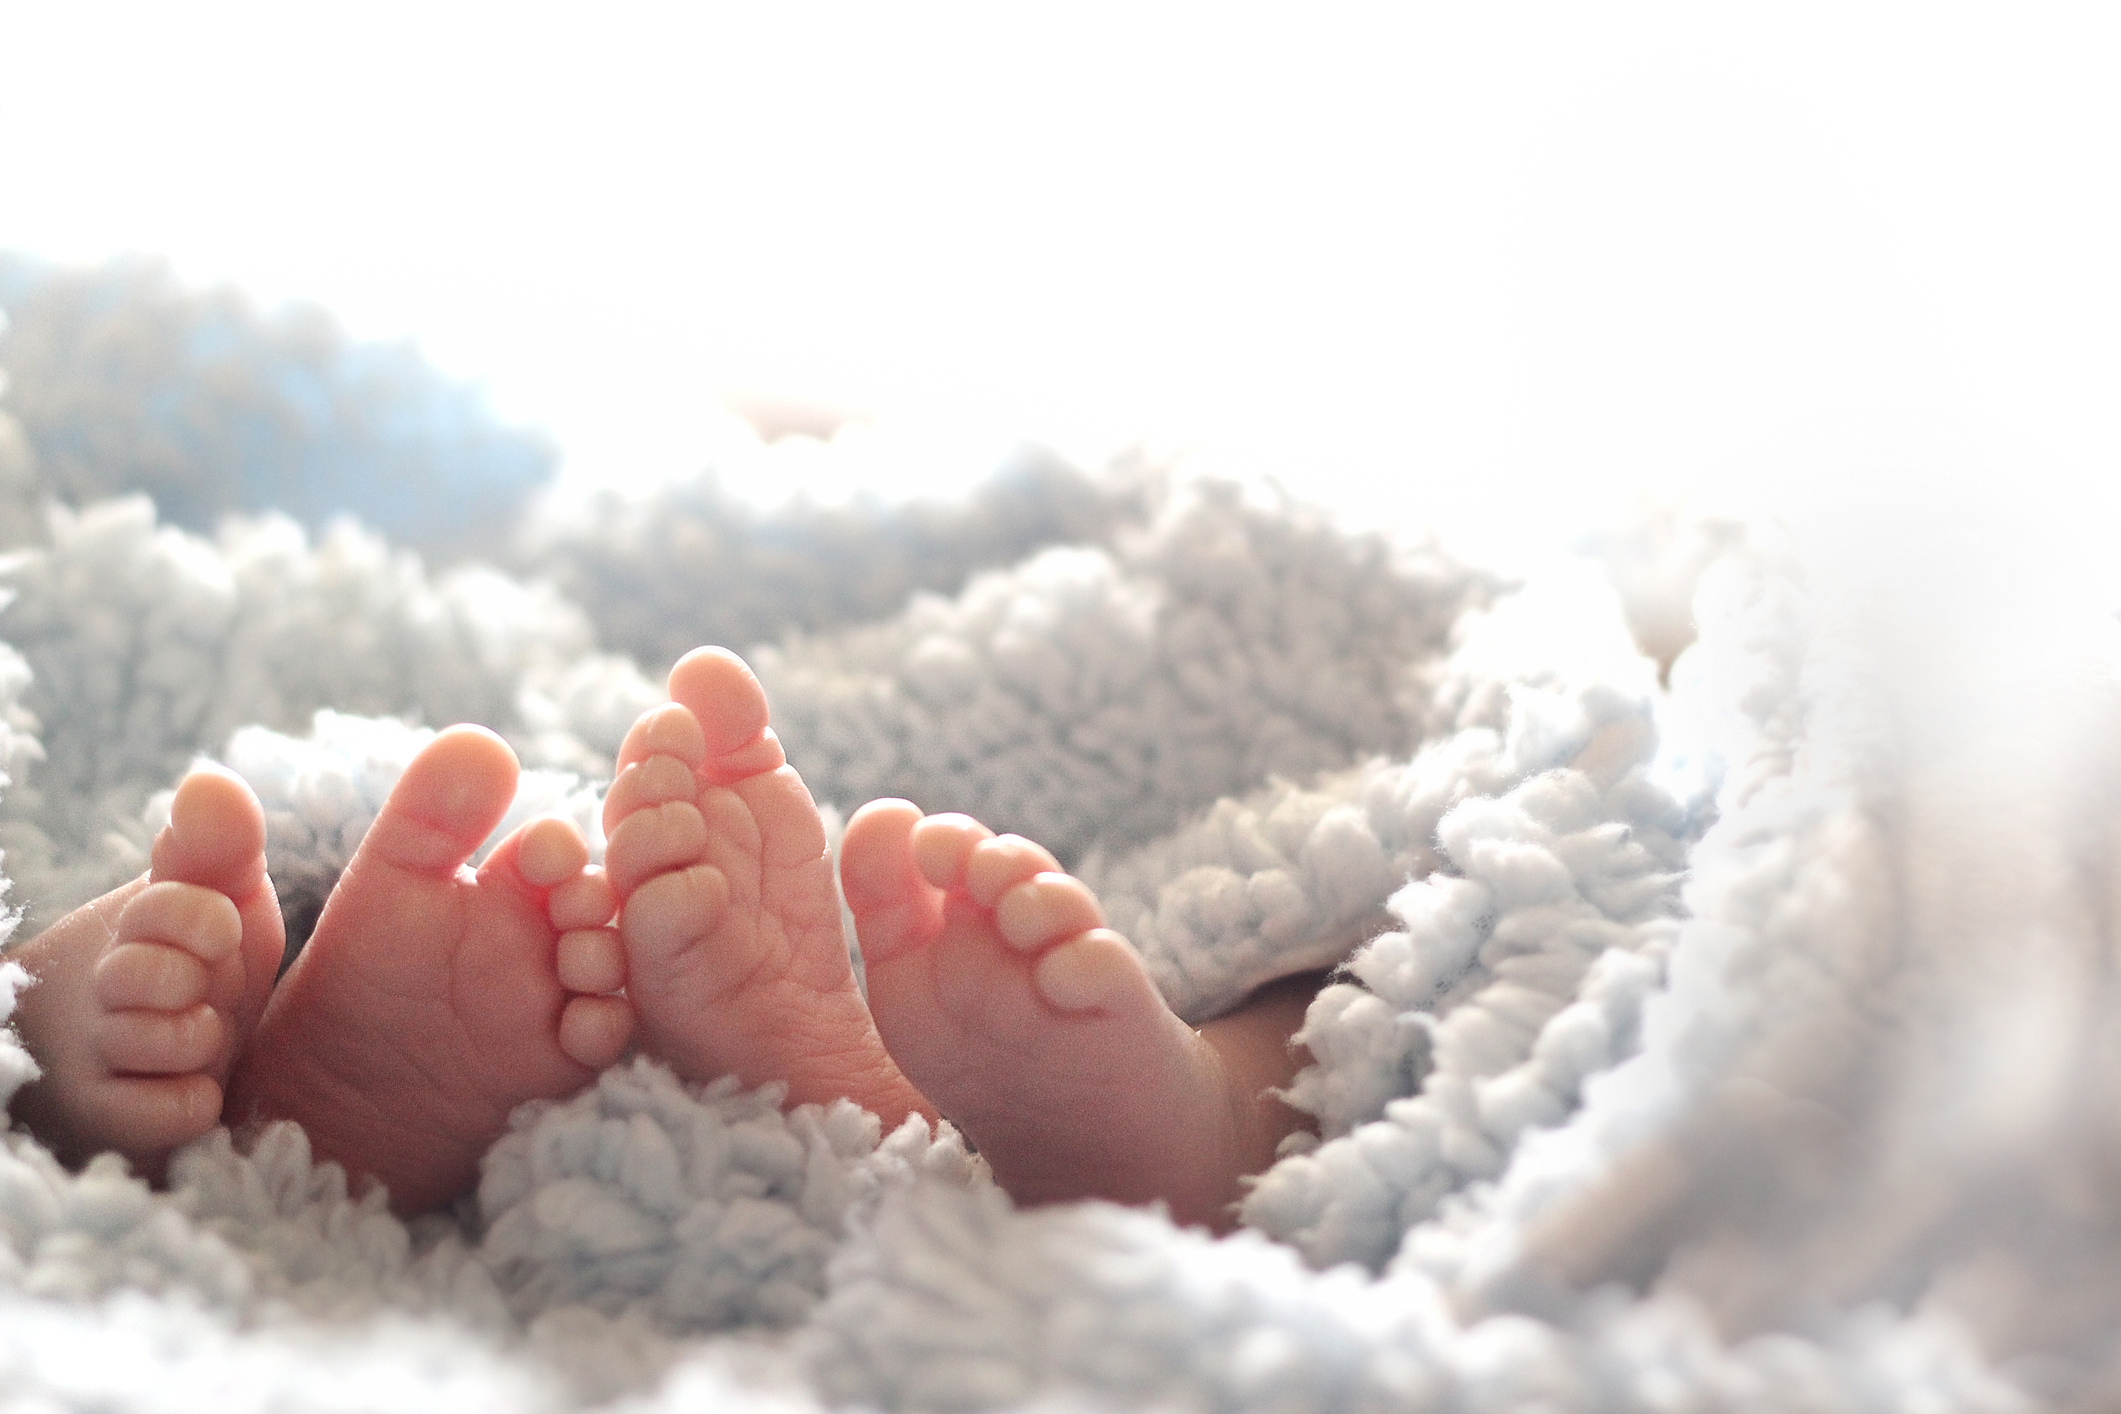 Two newborn baby feet wrapped in a soft, fluffy blanket